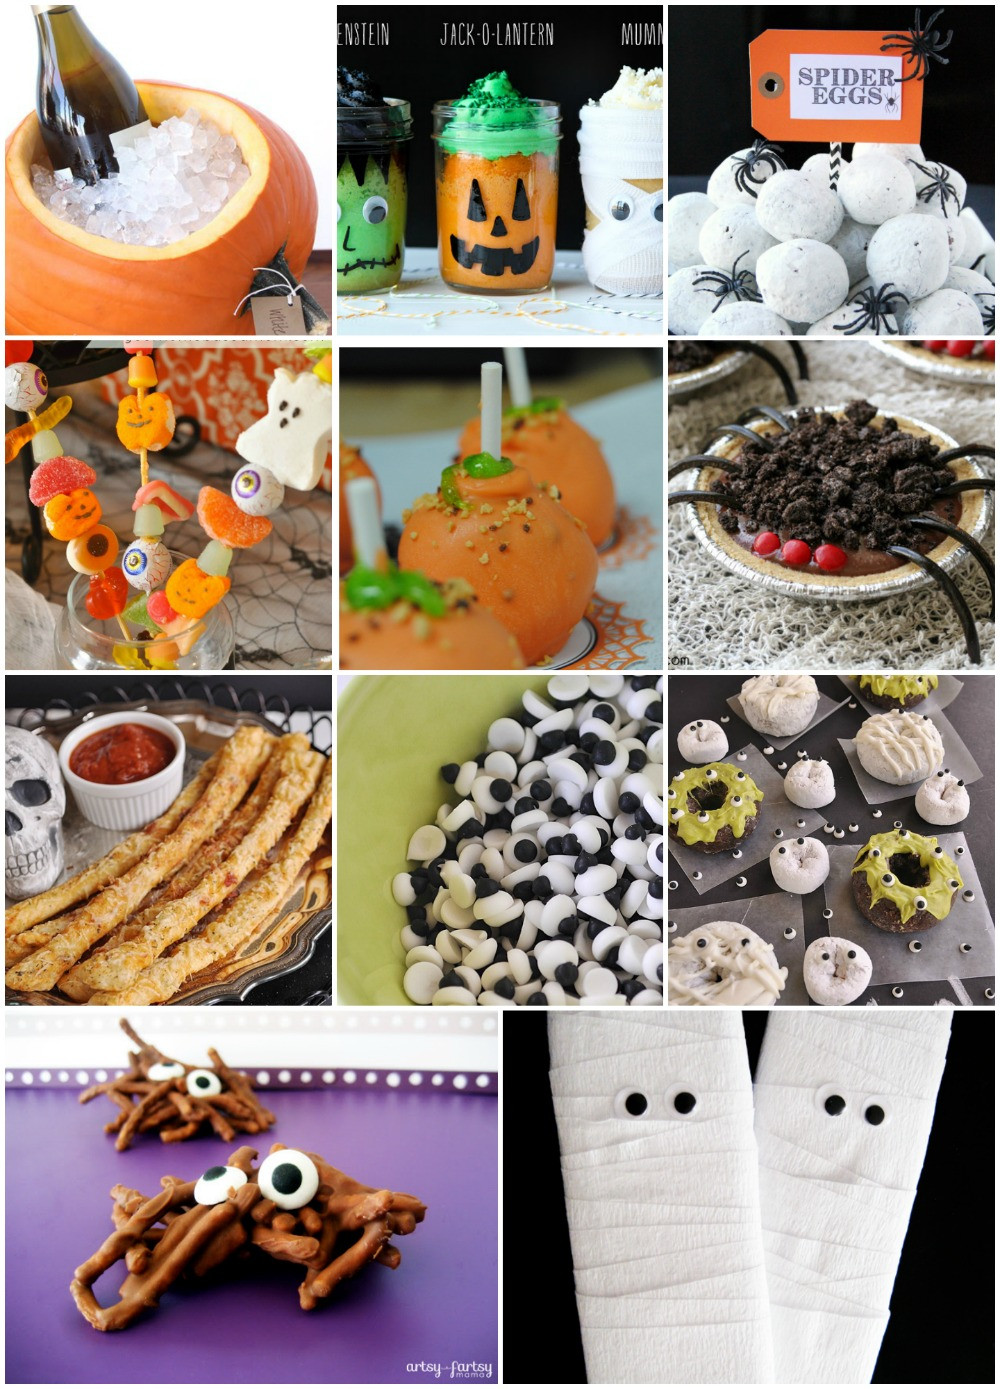 Food Ideas For Halloween Party
 Halloween Party Food